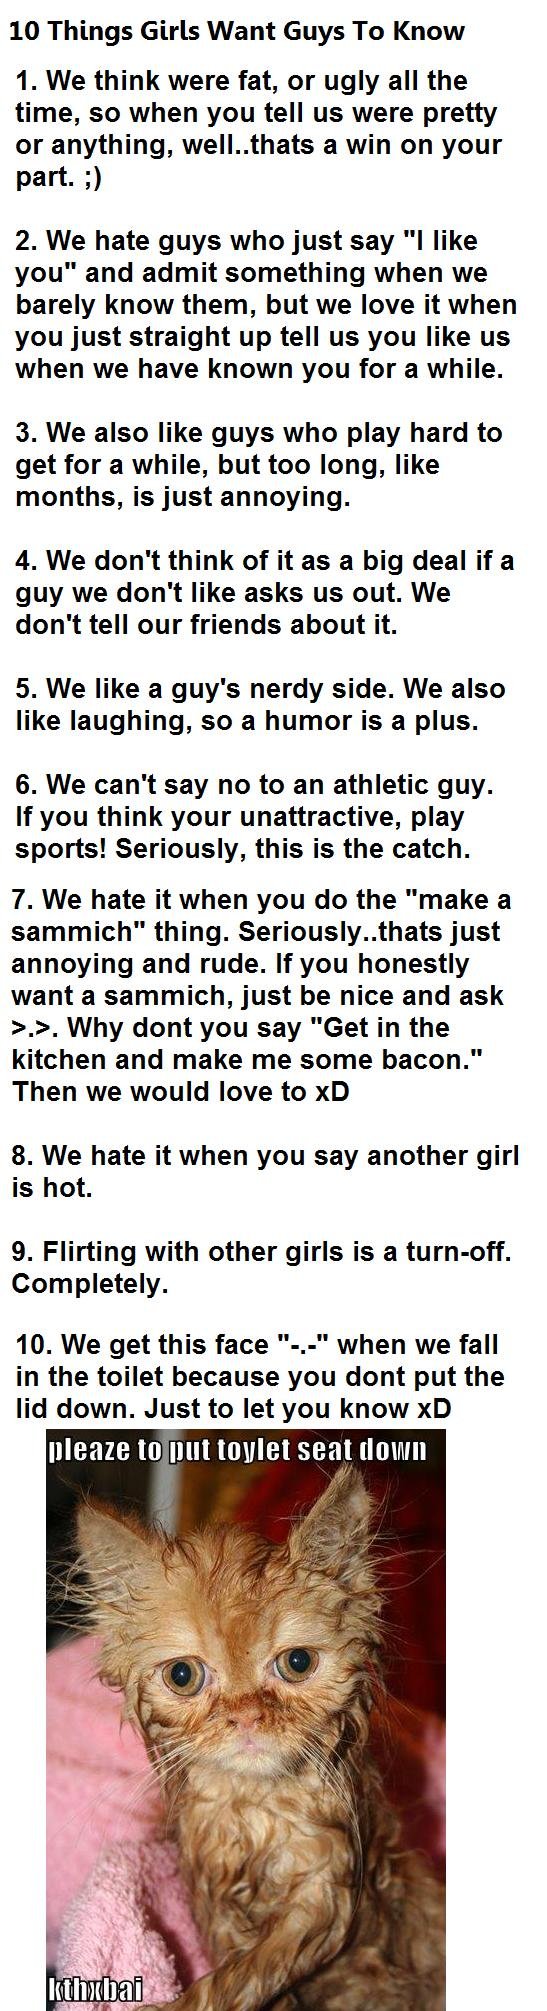 Things girls dont like